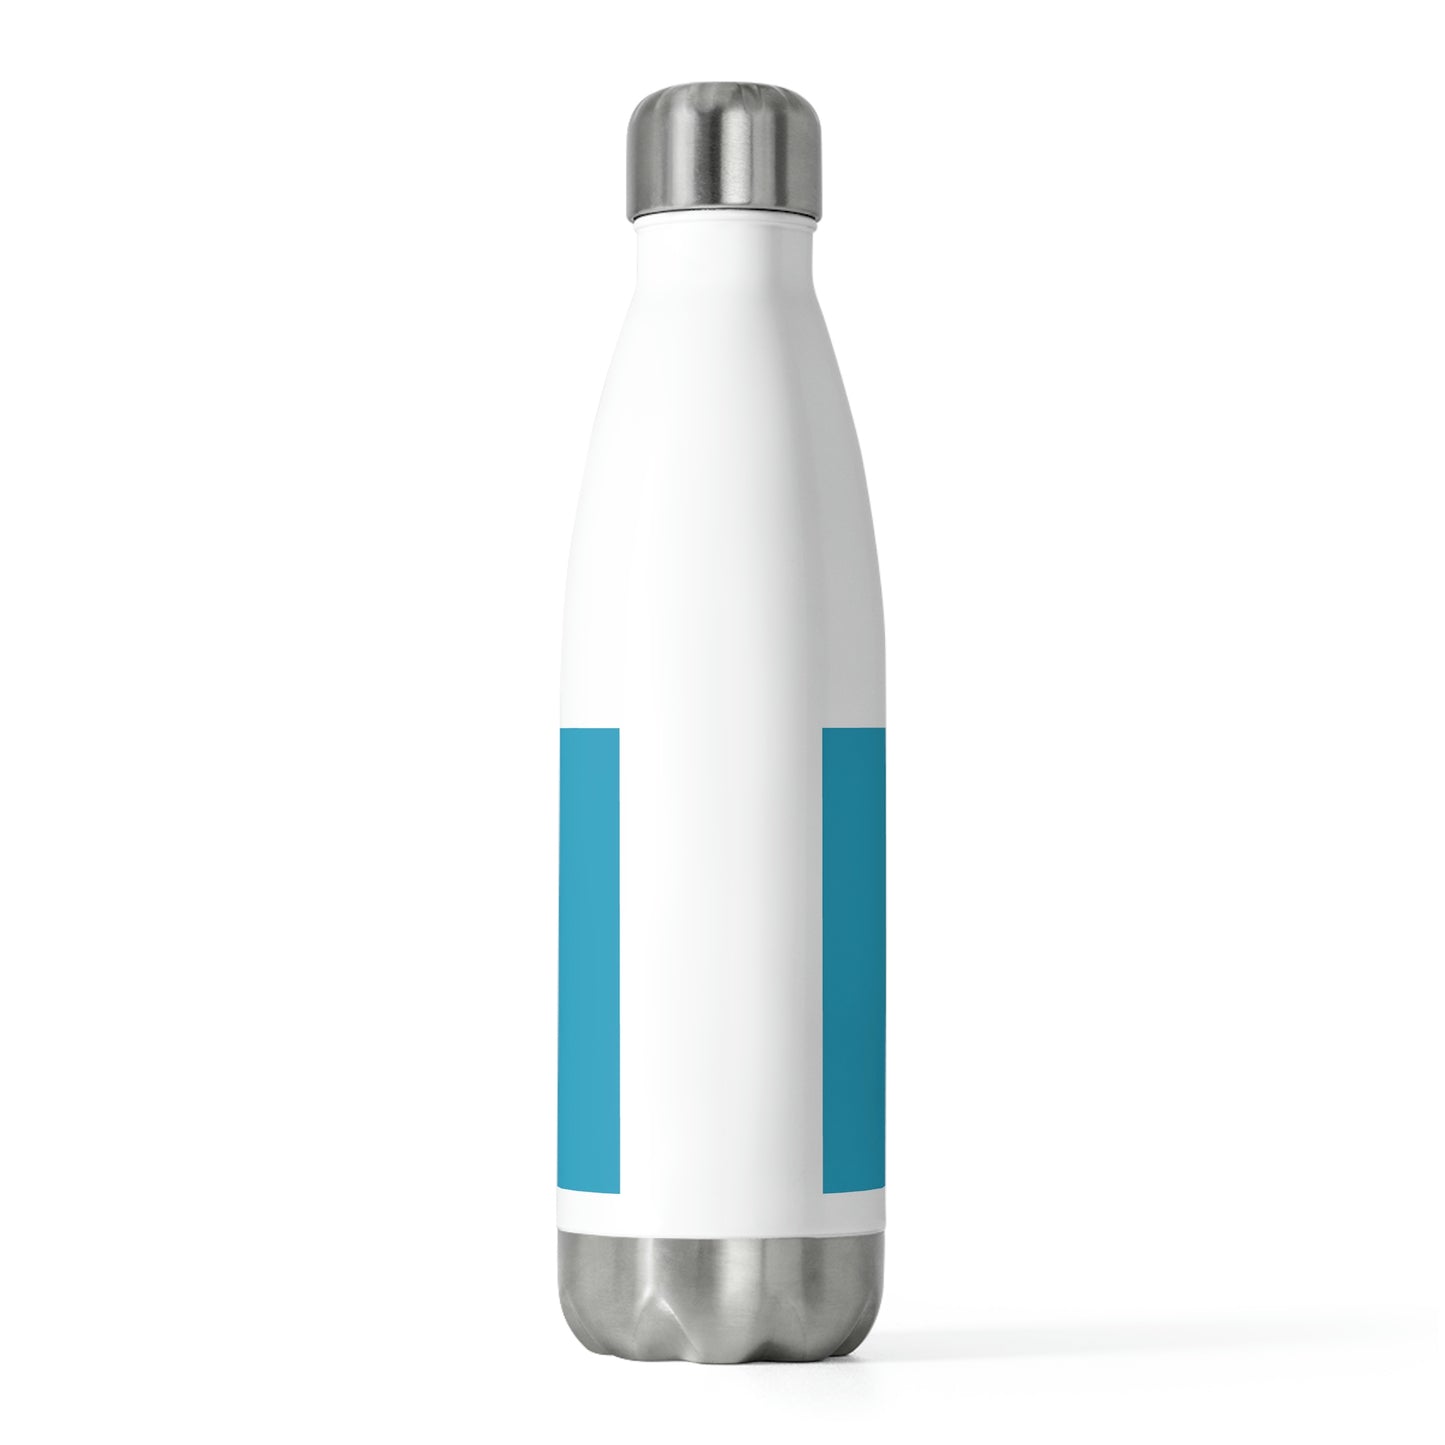 God In Every Season Insulated Bottle